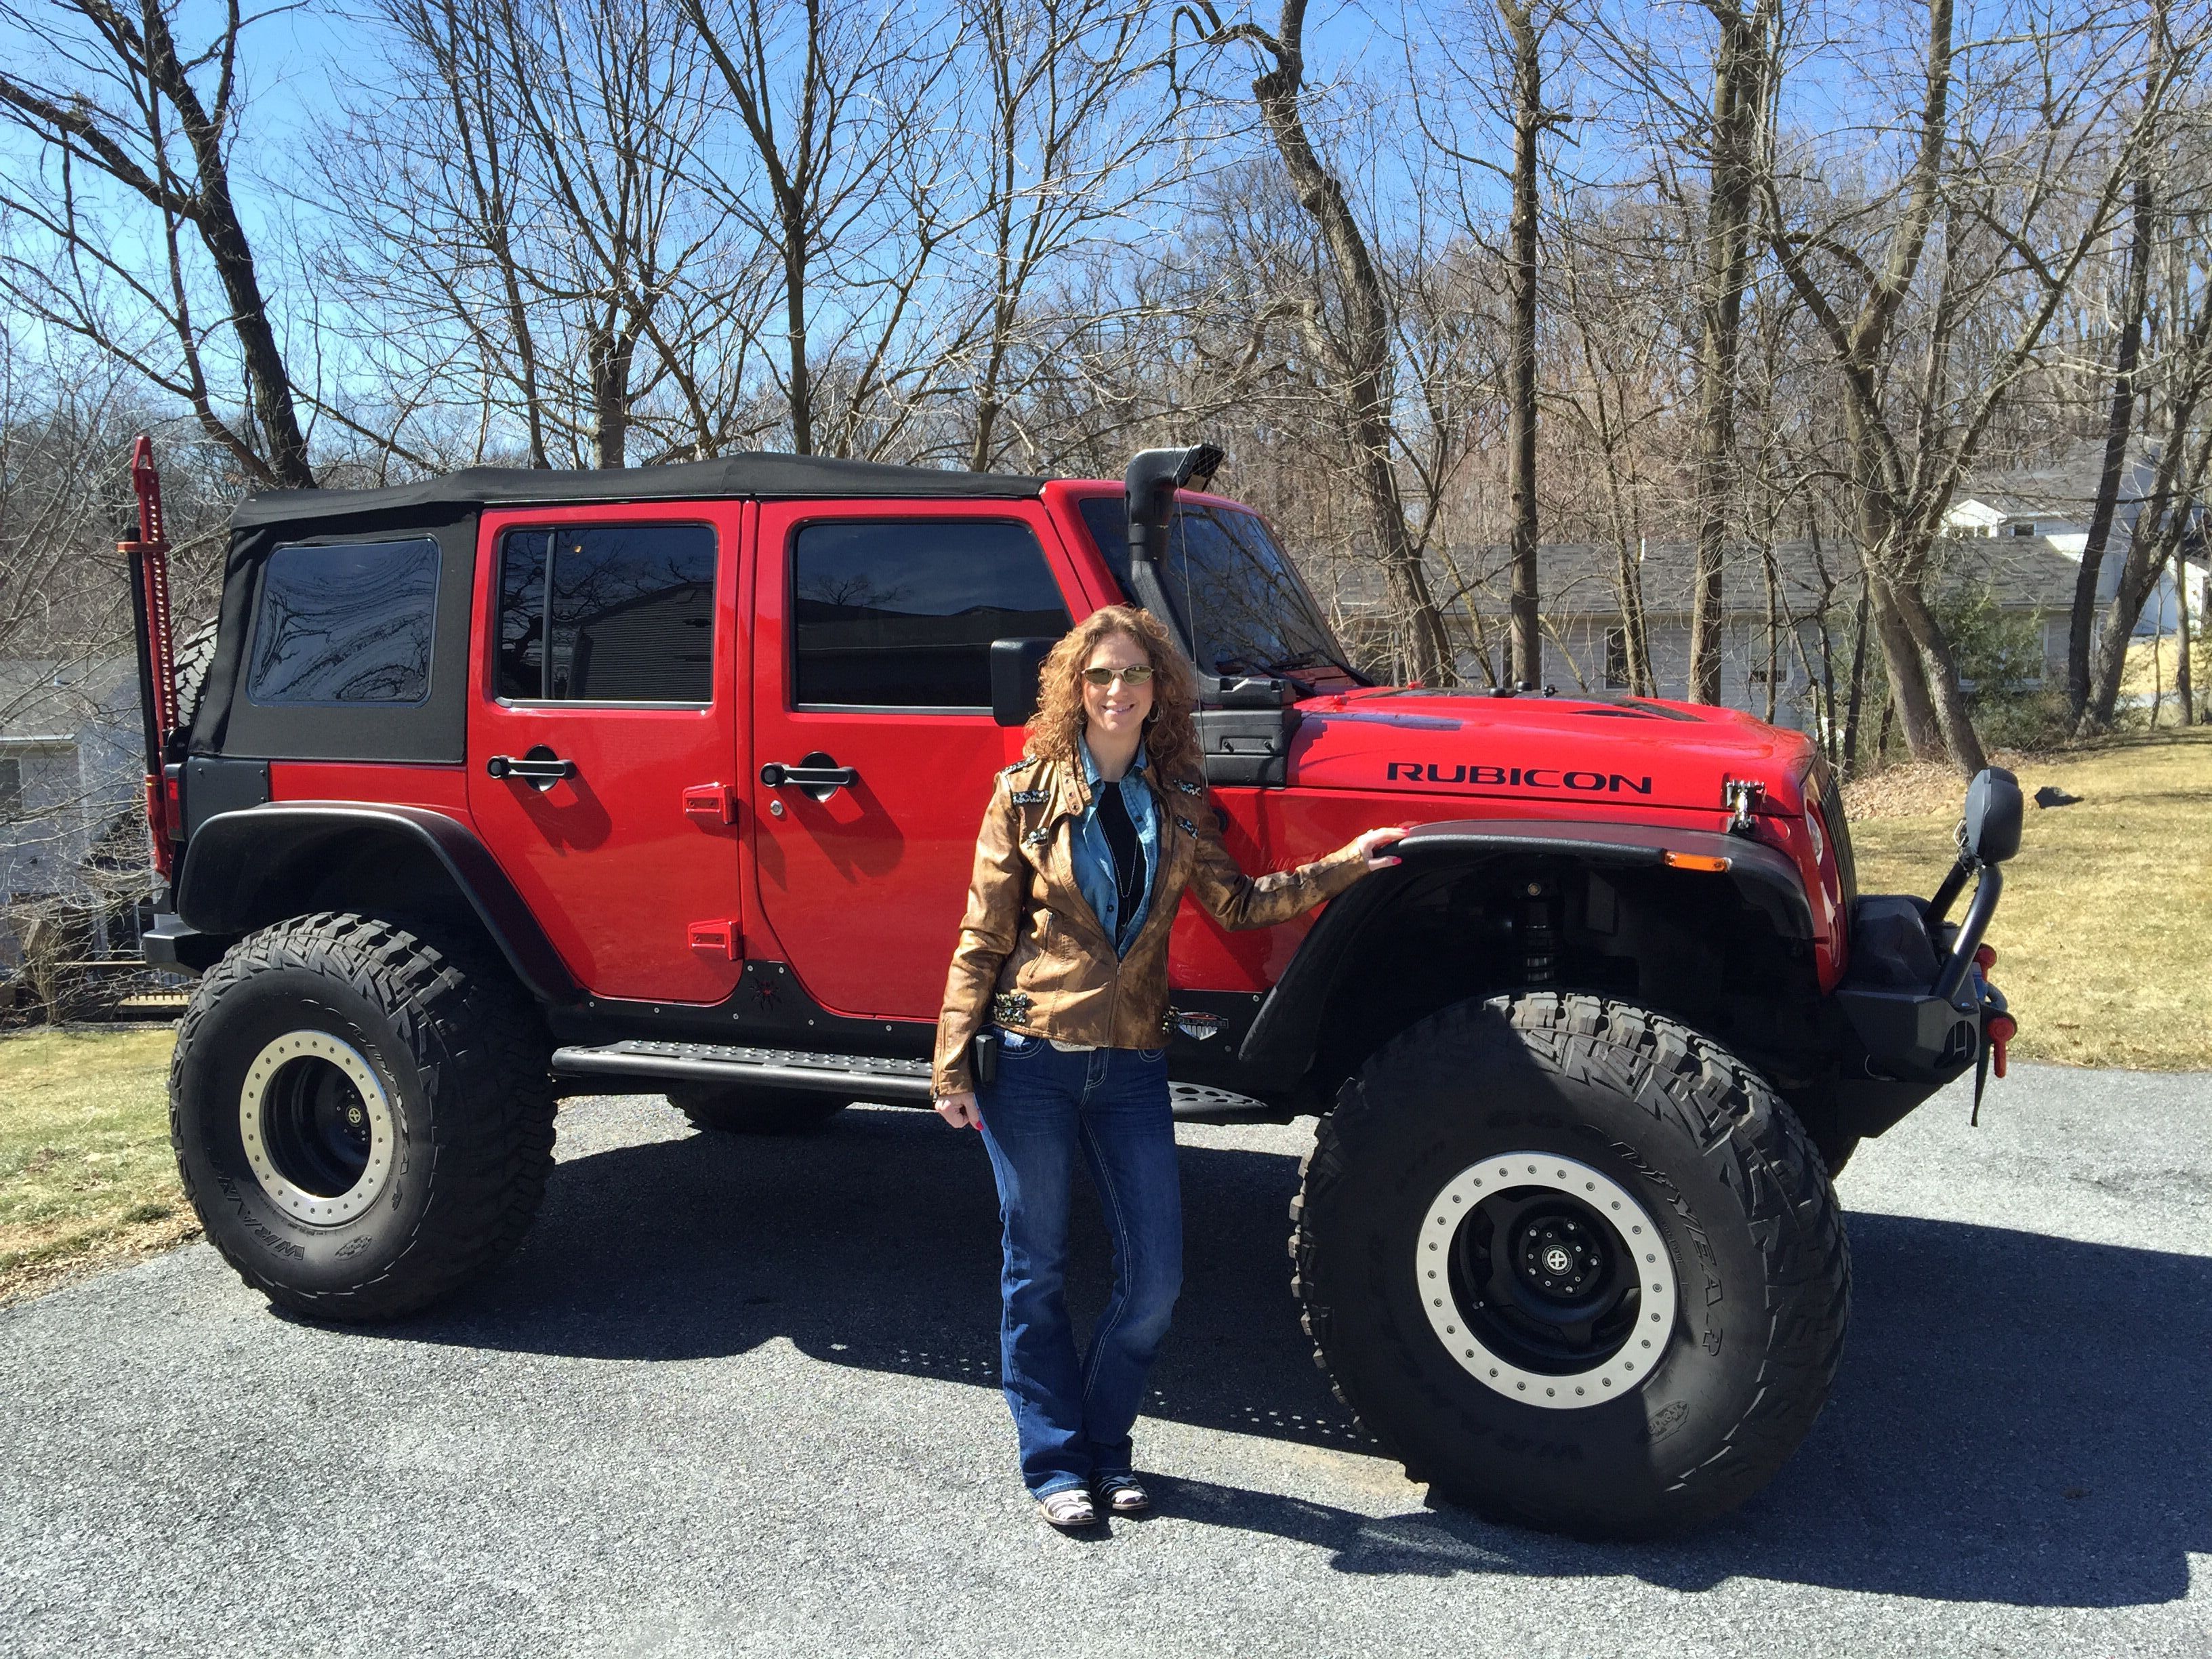 Wife &amp; my new 2012 rubicon